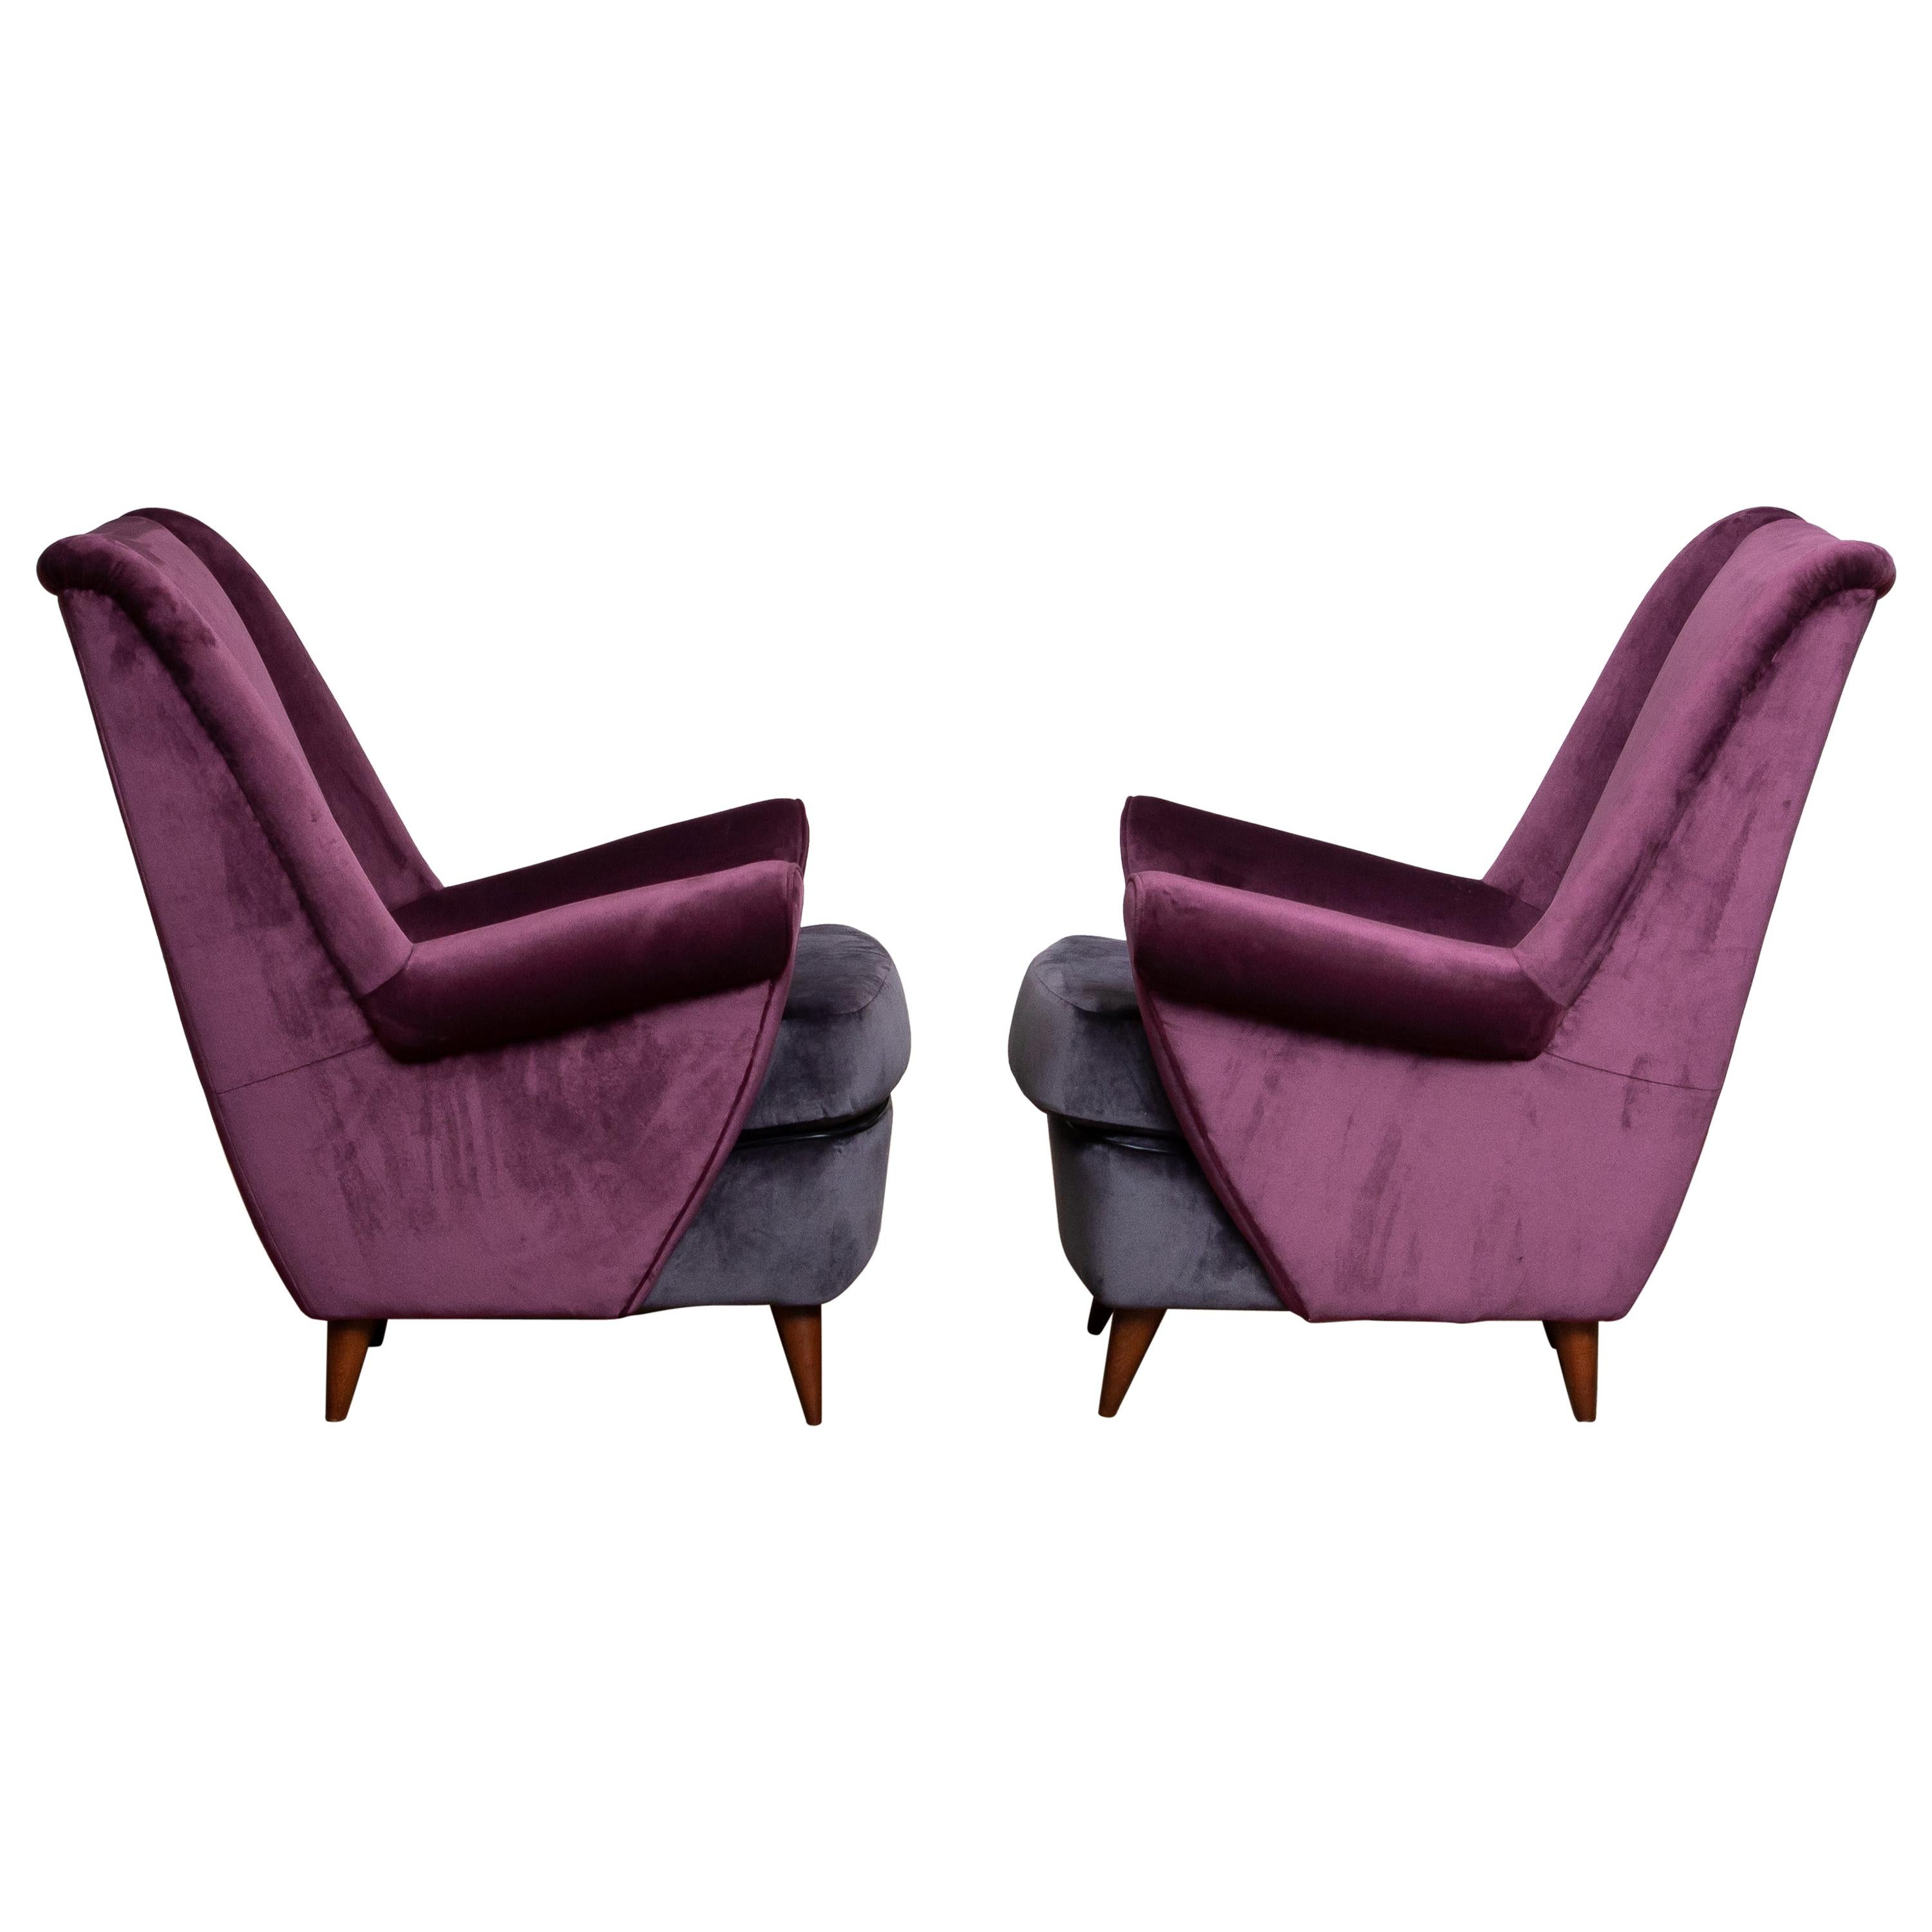 1950s Pair of Lounge / Easy Chairs Designed Gio Ponti Made by ISA Bergamo, Italy